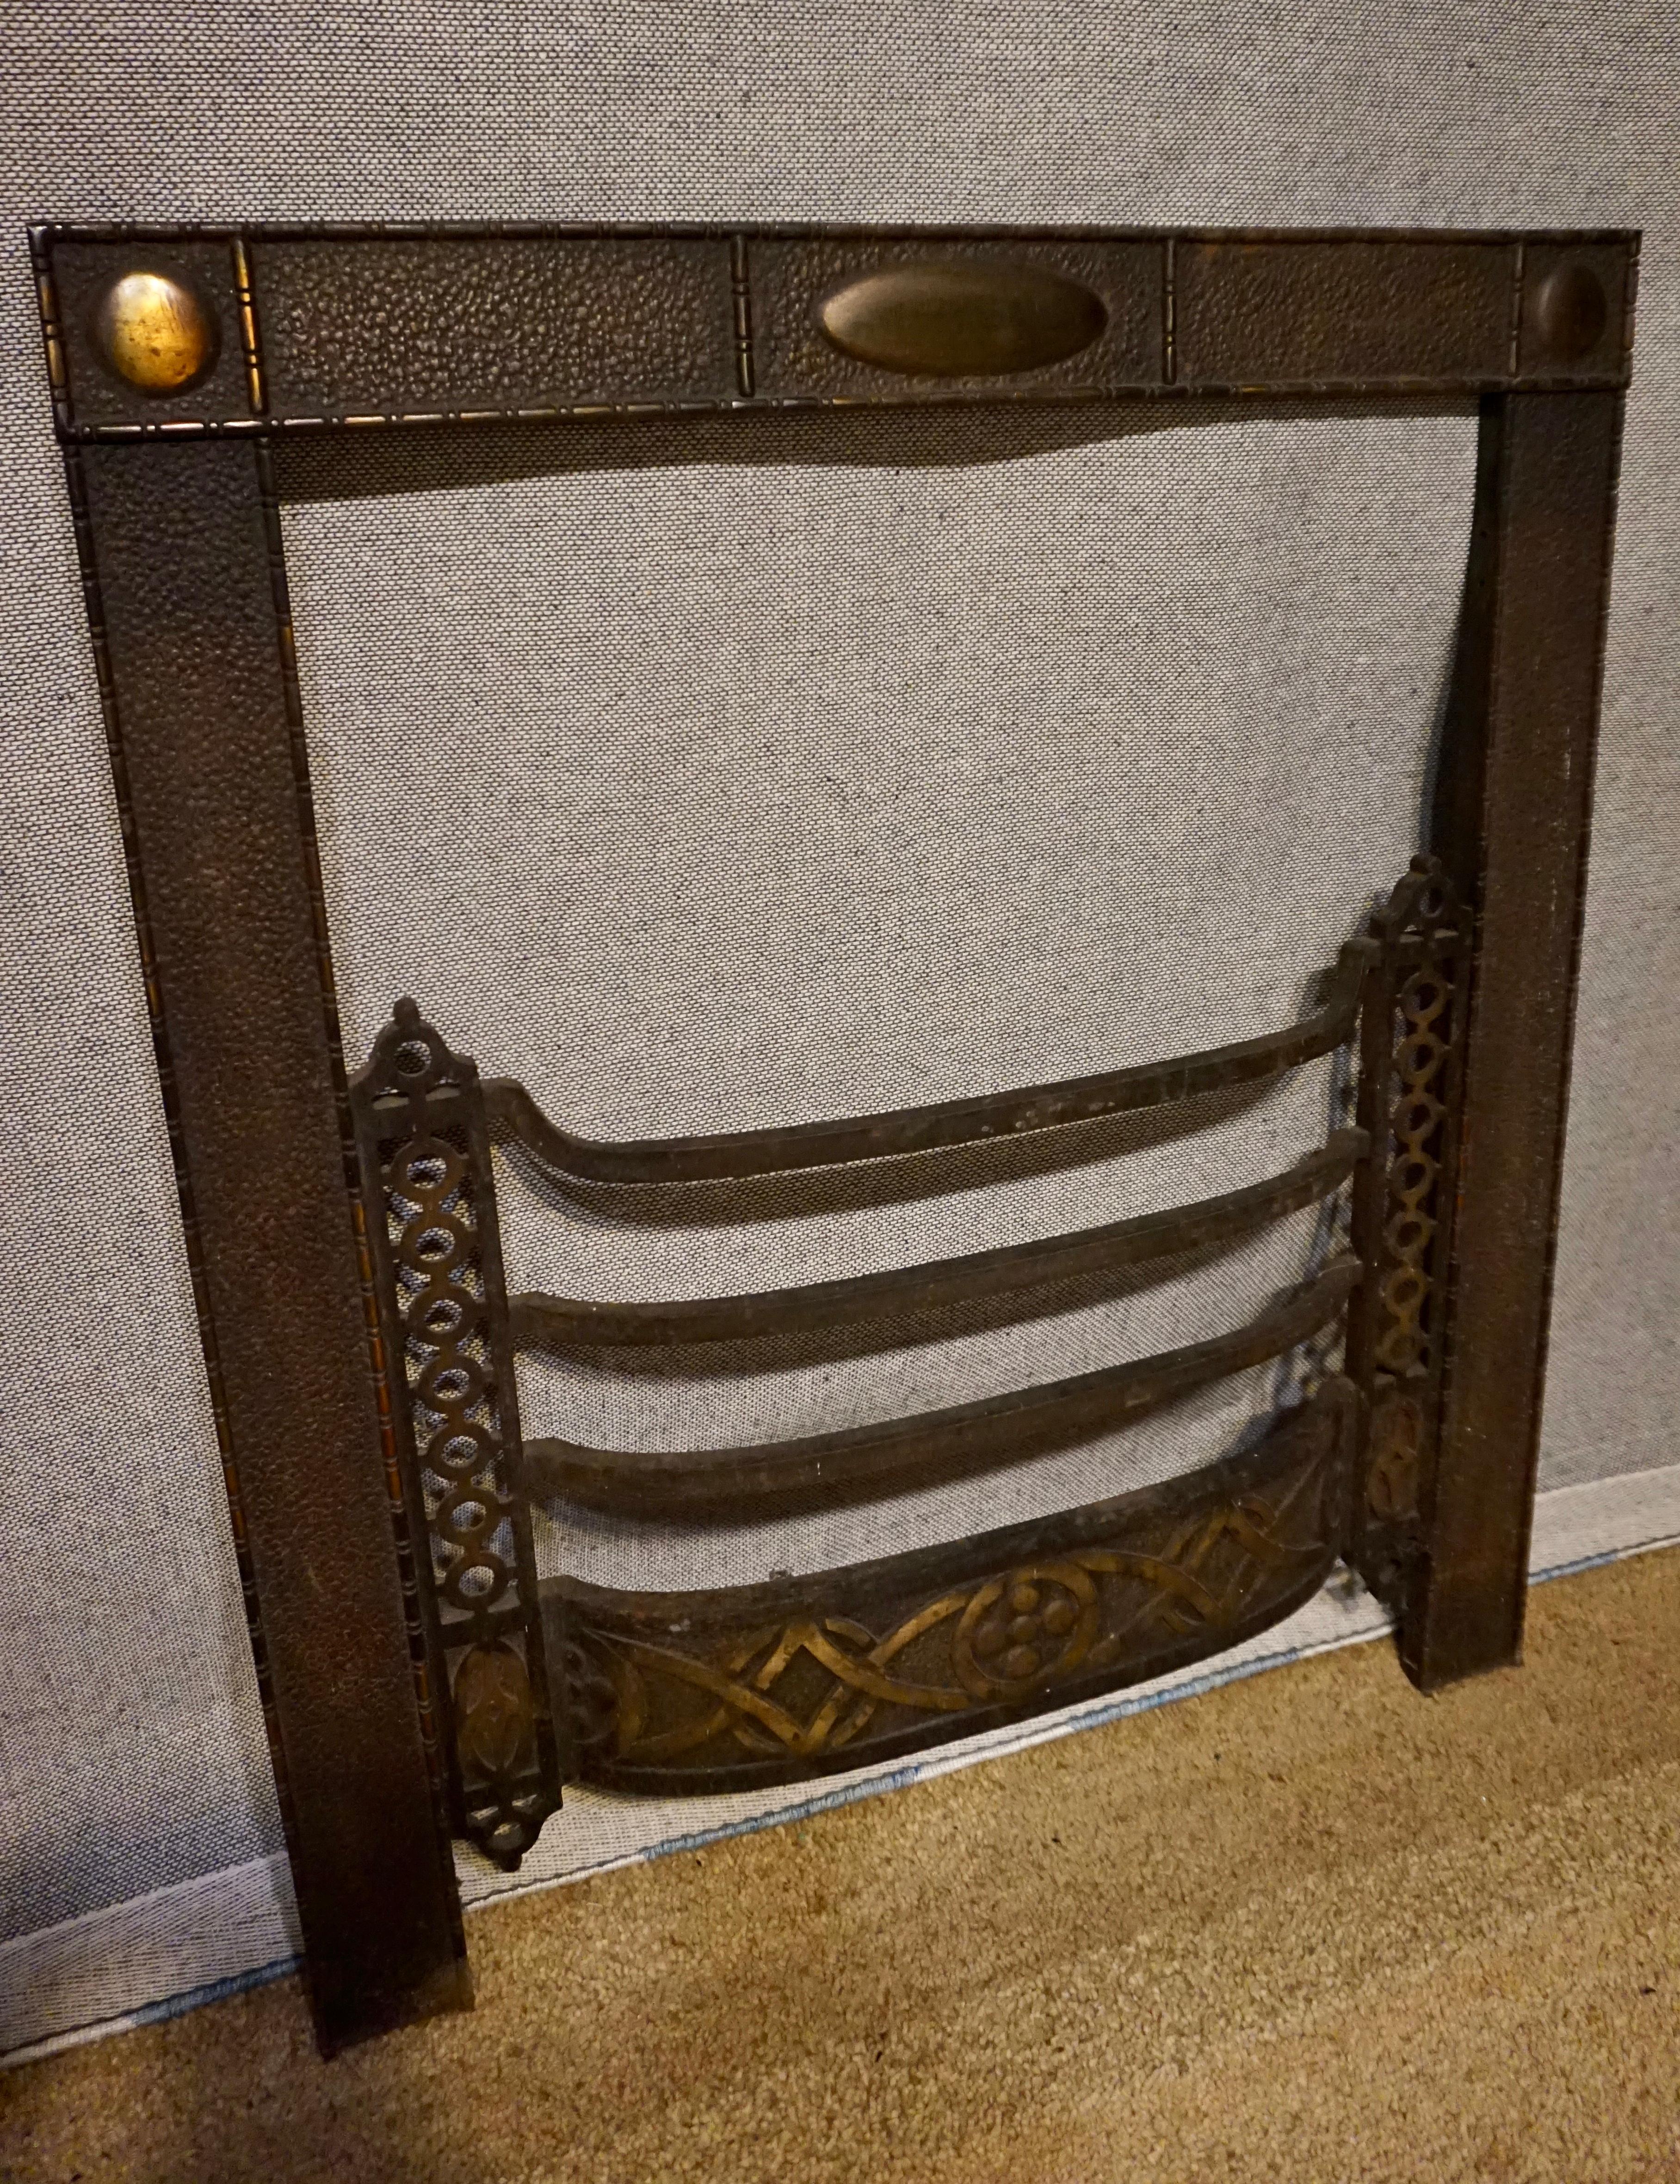 Fine Arts & Crafts mantel (fireplace) example with dark patina brass. Salvaged from old bungalow of the period. Subtle details and understated elegance,

circa 1905-1910.